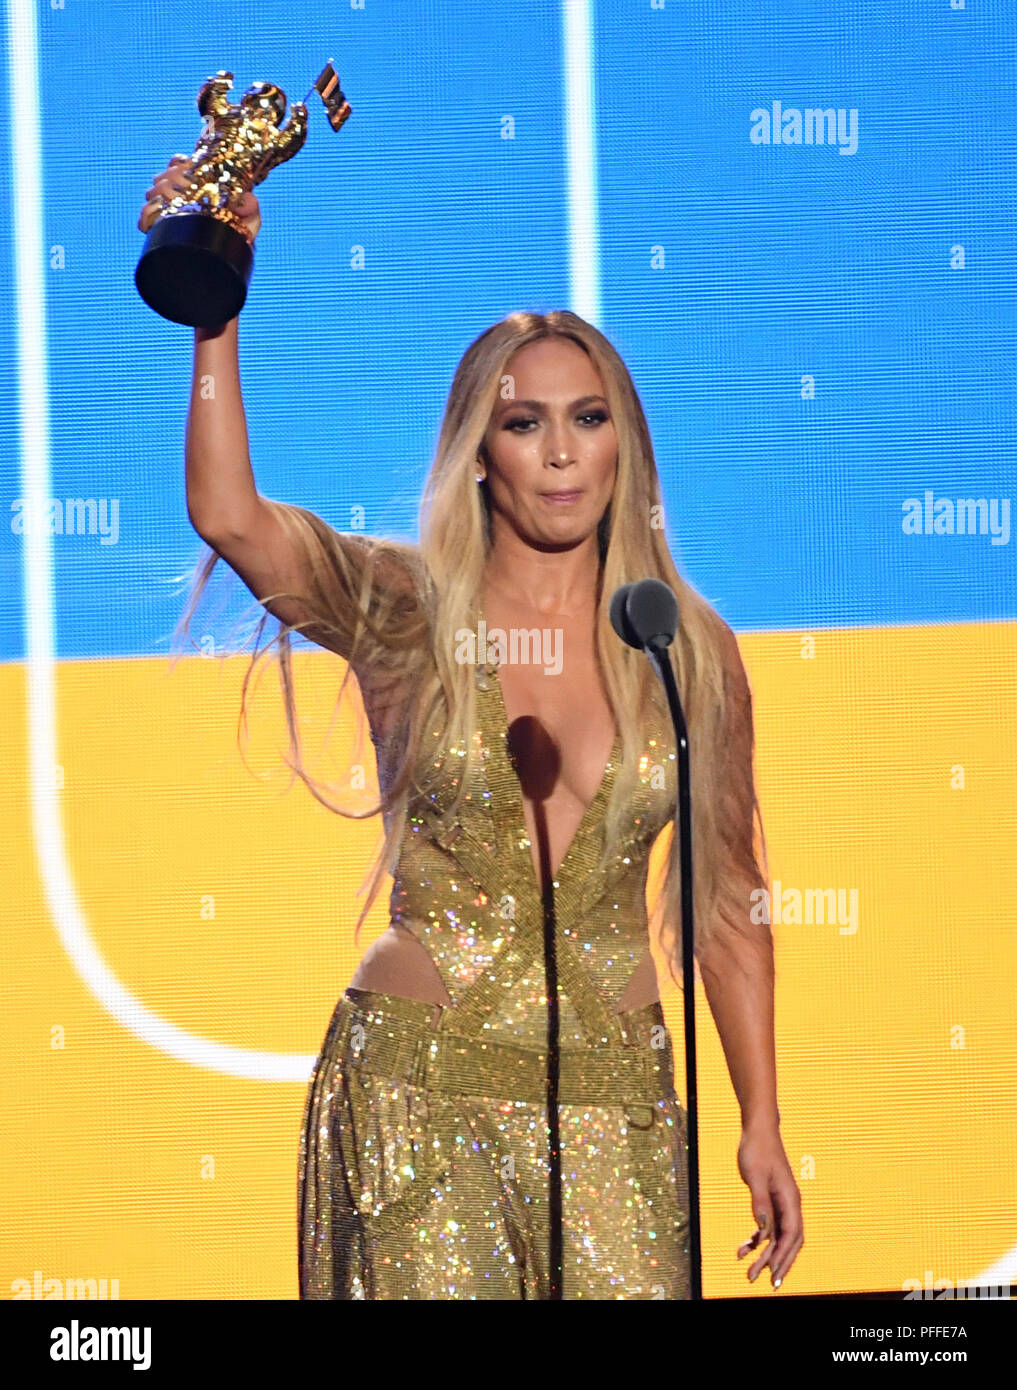 Jenifer Lopez on stage at the 2018 MTV Video Music Awards held at Radio City Music Hall in Los Angeles, USA. Picture date: Monday August 20, 2018. See PA Story SHOWBIZ VMAs. Photo credit should read: PA/PA Wire on stage at the 2018 MTV Video Music Awards held at The Forum in Los Angeles, USA. Picture date: Monday August 20, 2018. See PA Story SHOWBIZ VMAs. Photo credit should read: PA/PA Wire Stock Photo